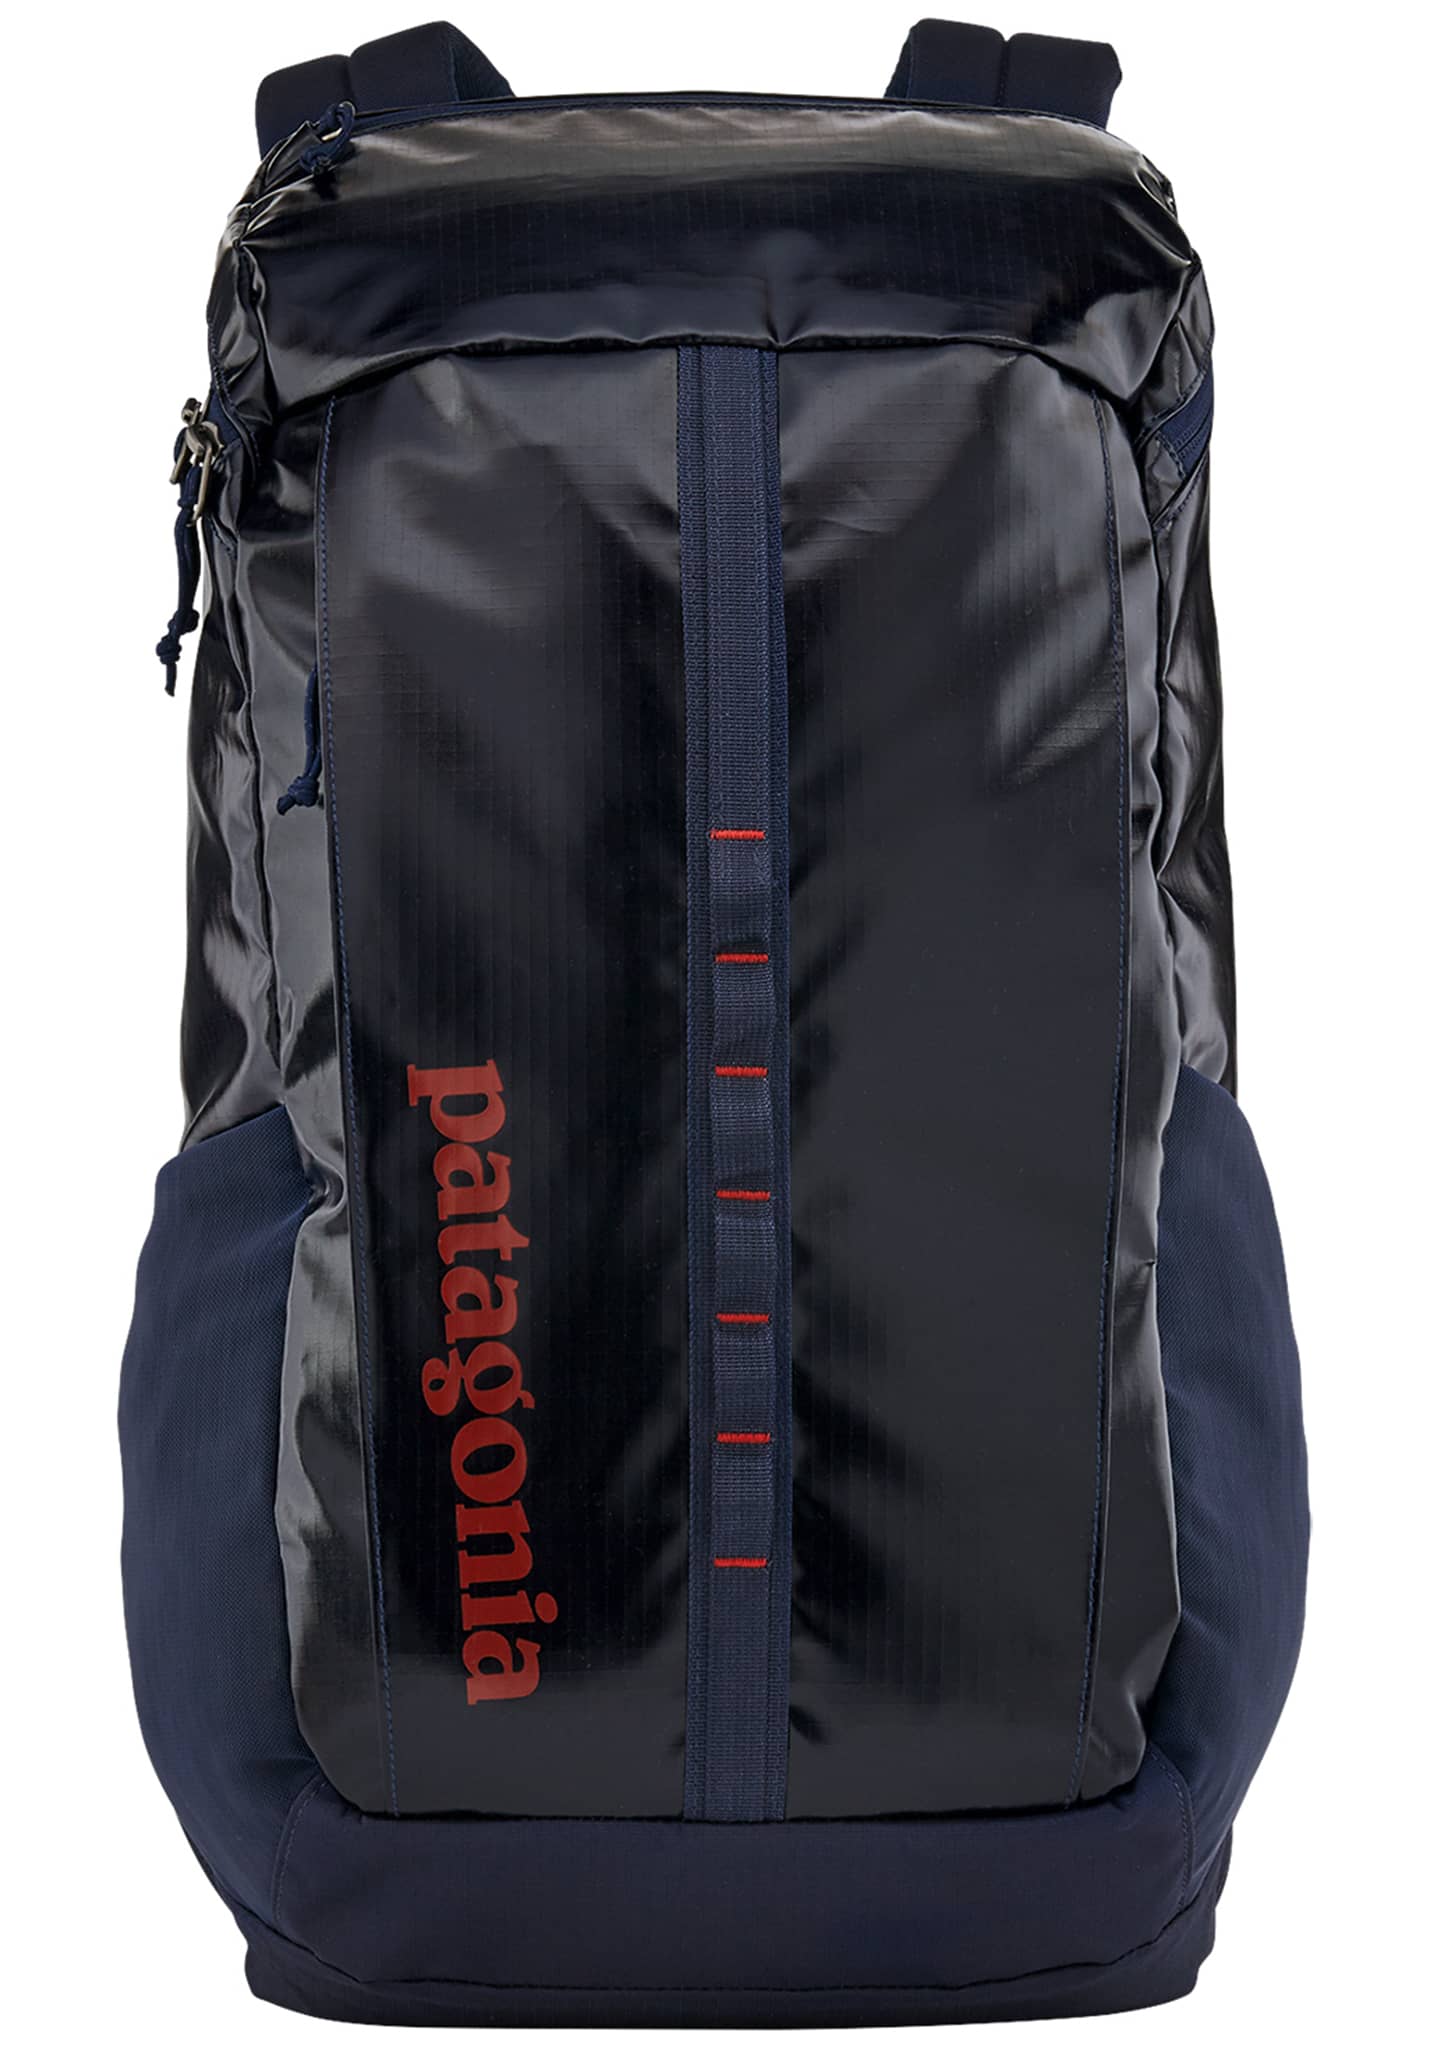 Patagonia Black Hole 25L Rucksack classic navy One Size